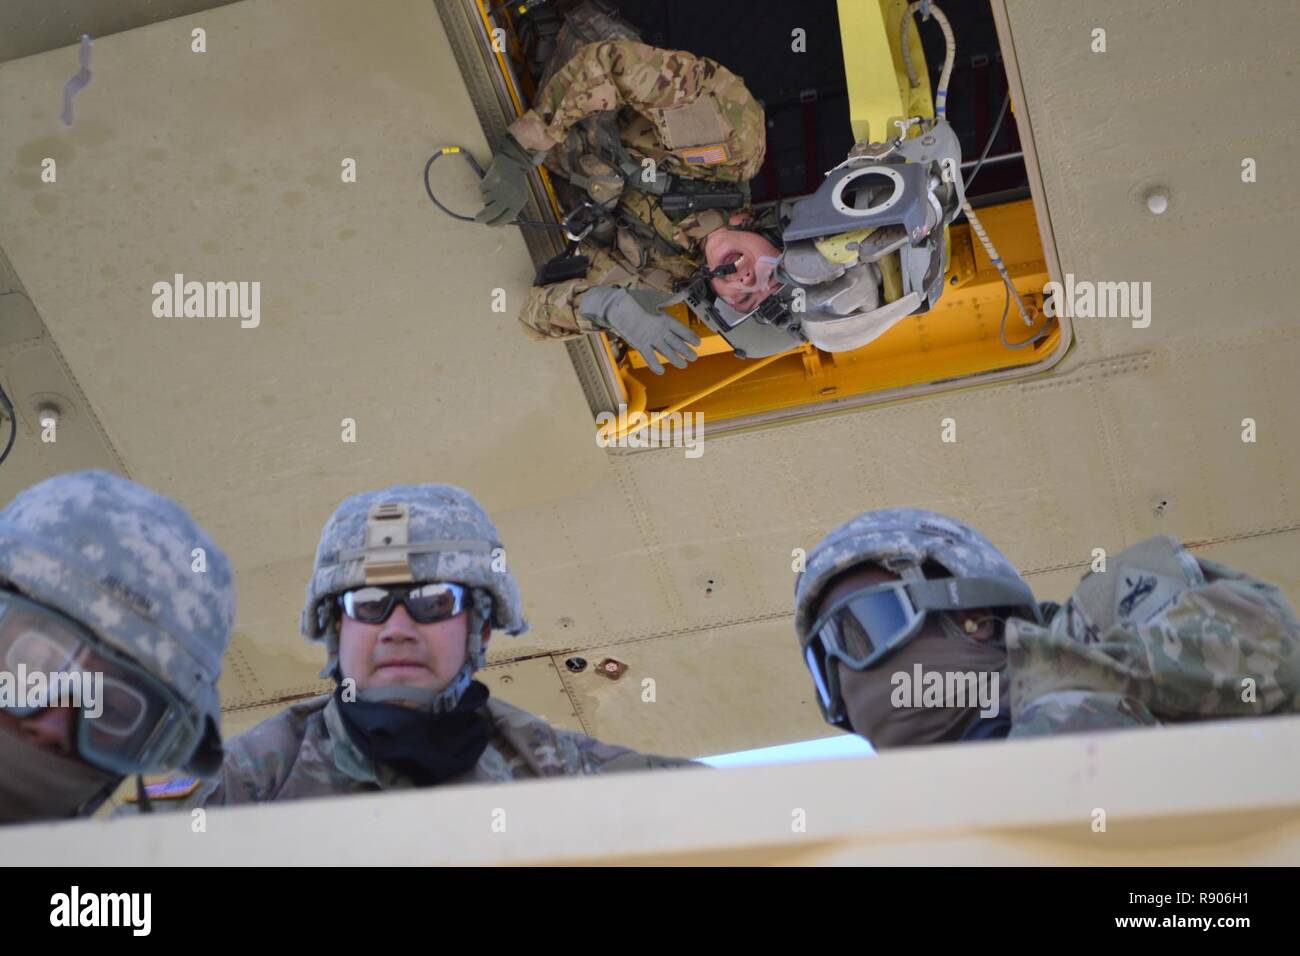 Spc. Dylan McNatt, upper center, assigned to the 2nd Battalion, 501st Aviation Regiment, Combat Aviation Brigade, 1st Armored Division, delivers communications from the bottom of a CH-47 Chinook as it hovers above a Conex box during sling load training at Biggs Army Airfield here Friday. Cpl. Andres Rios, in sunglasses, assigned to Headquarters and Headquarters Company, Special Troops Battalion, 1st Armored Division Sustainment Brigade, prepares to climb off the box with two fellow Soldiers. Stock Photo